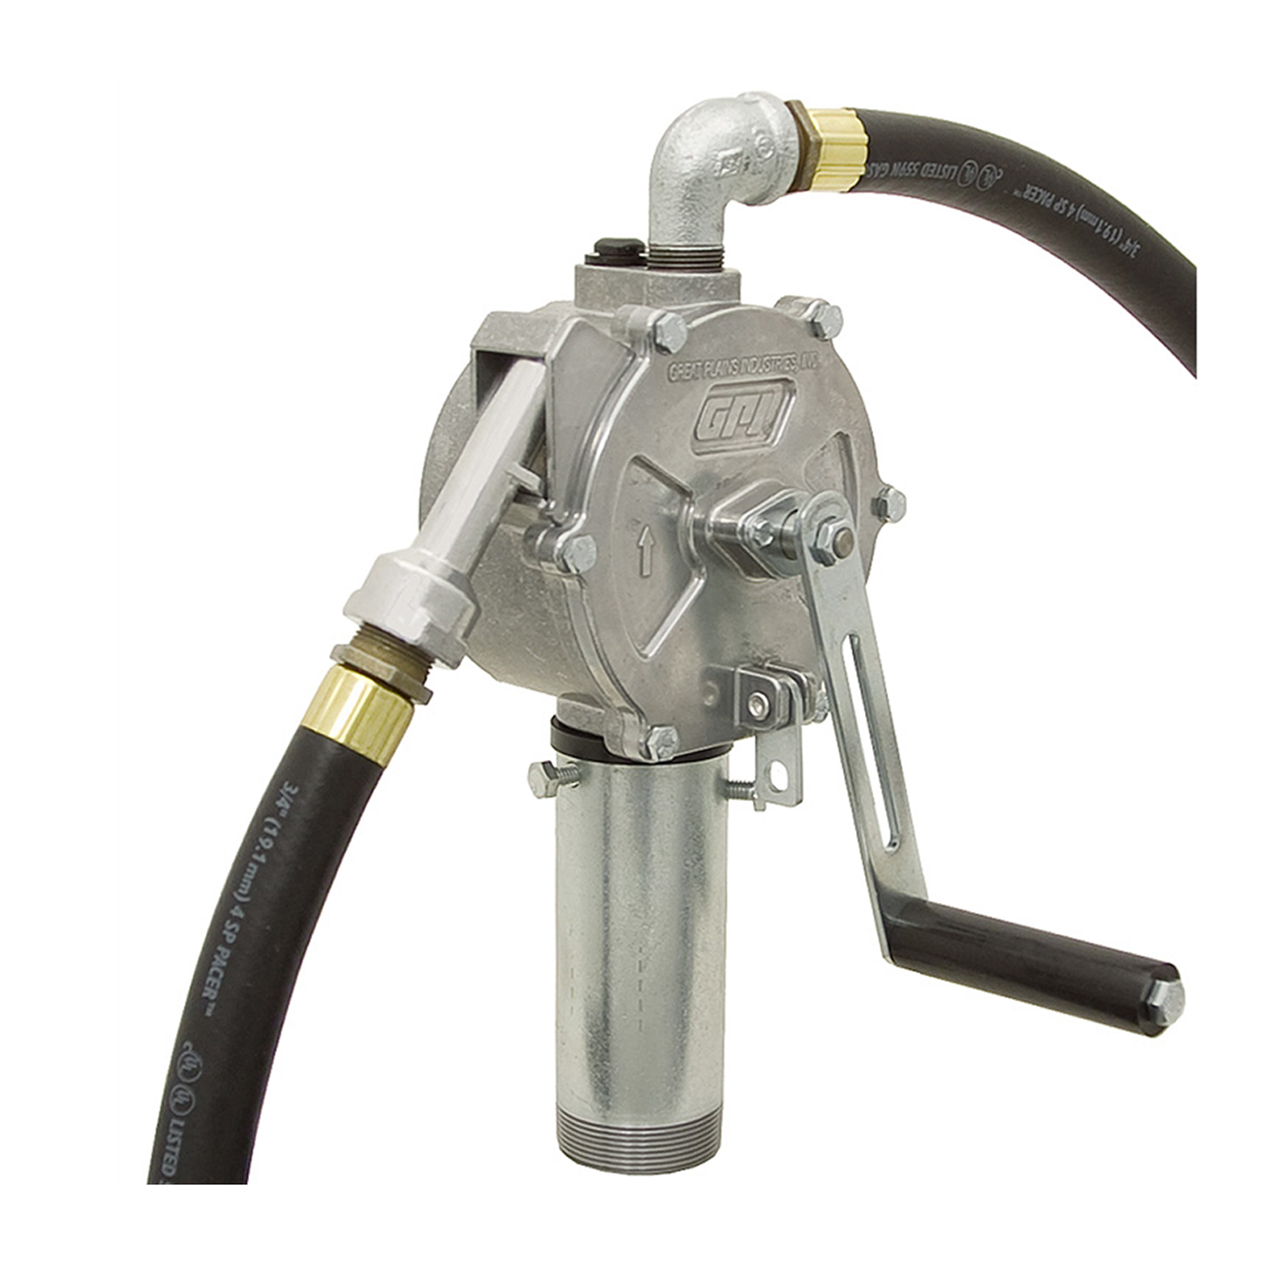 GPI 12300006 Rp-10-ul Rotary Fuel Transfer Hand Pump for sale online 